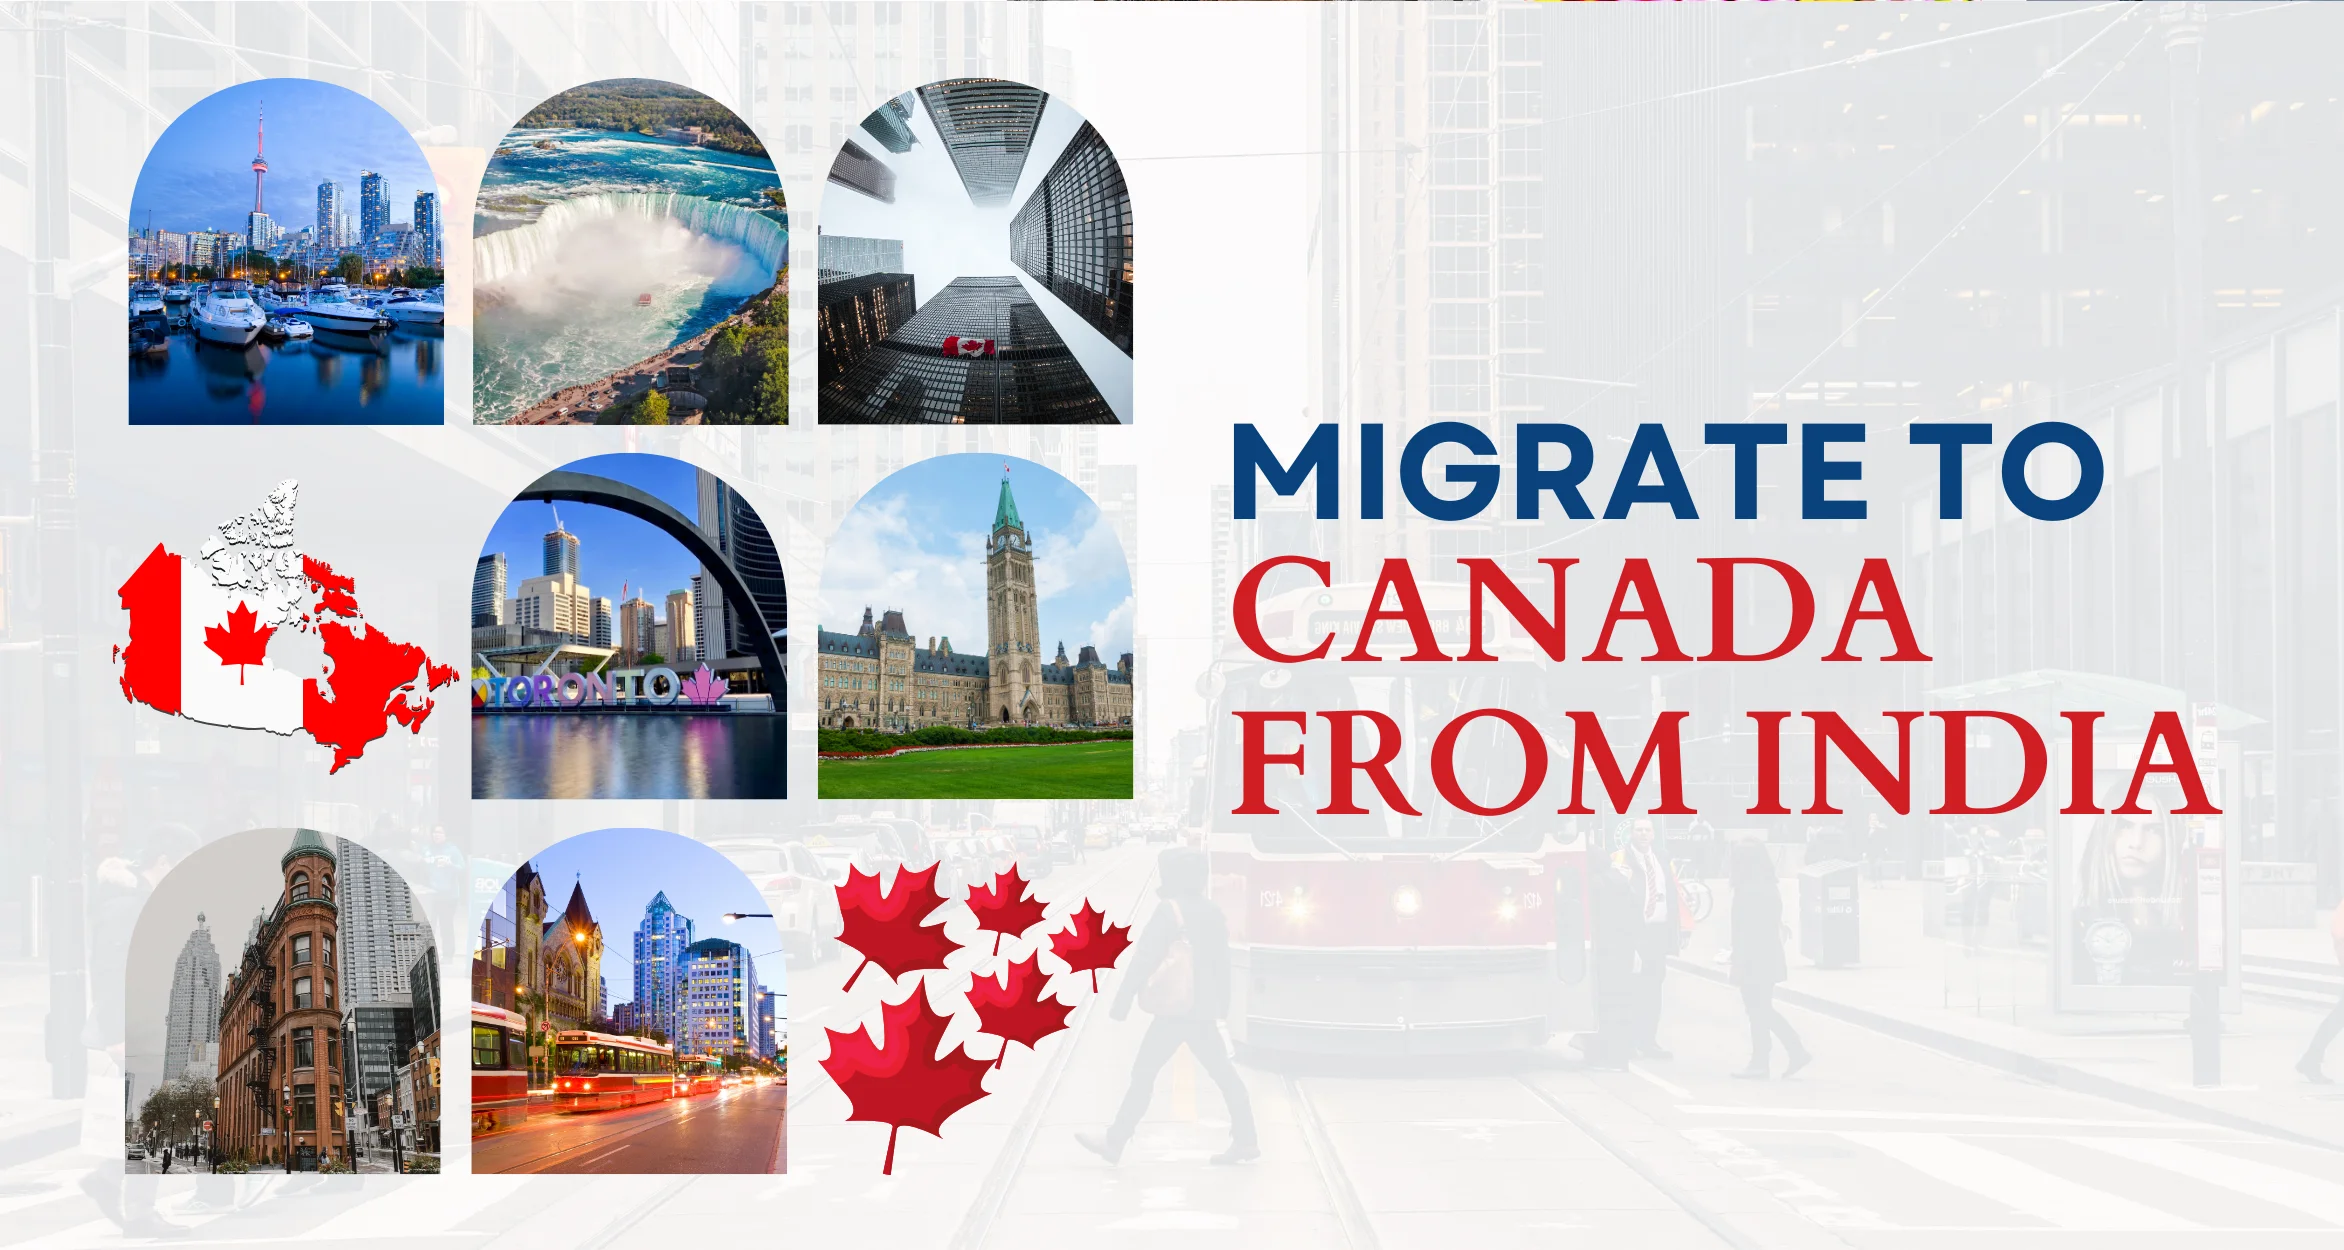 Migrate to Canada from India